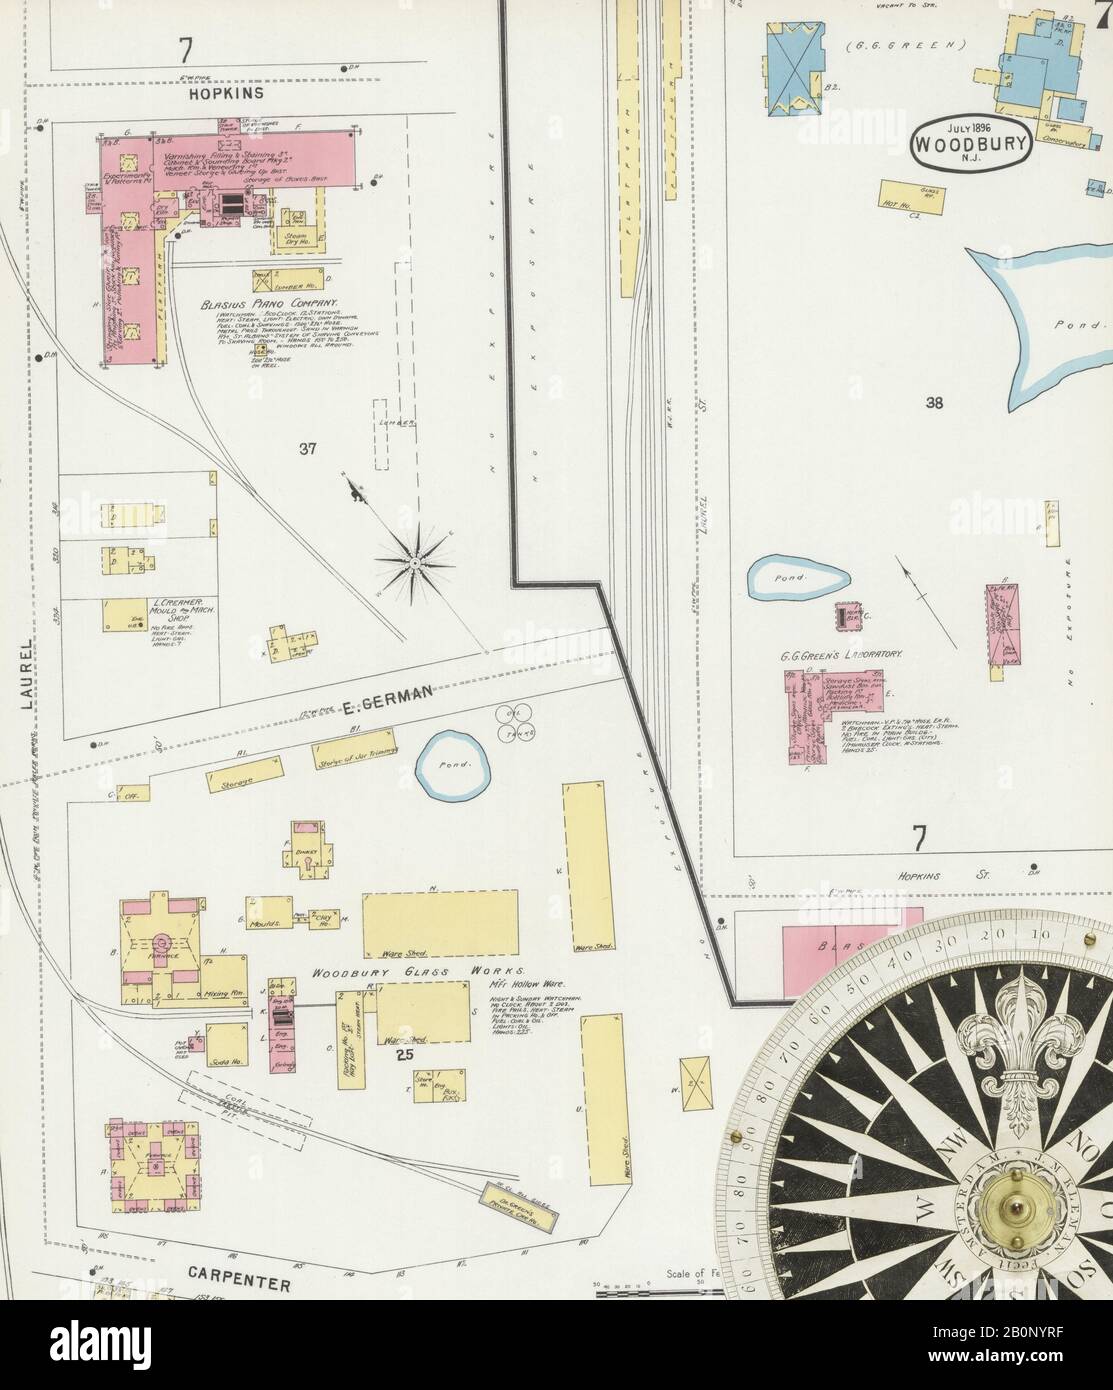 Image 7 of Sanborn Fire Insurance Map from Woodbury, Gloucester County, New Jersey. Jul 1896. 8 Sheet(s), America, street map with a Nineteenth Century compass Stock Photo